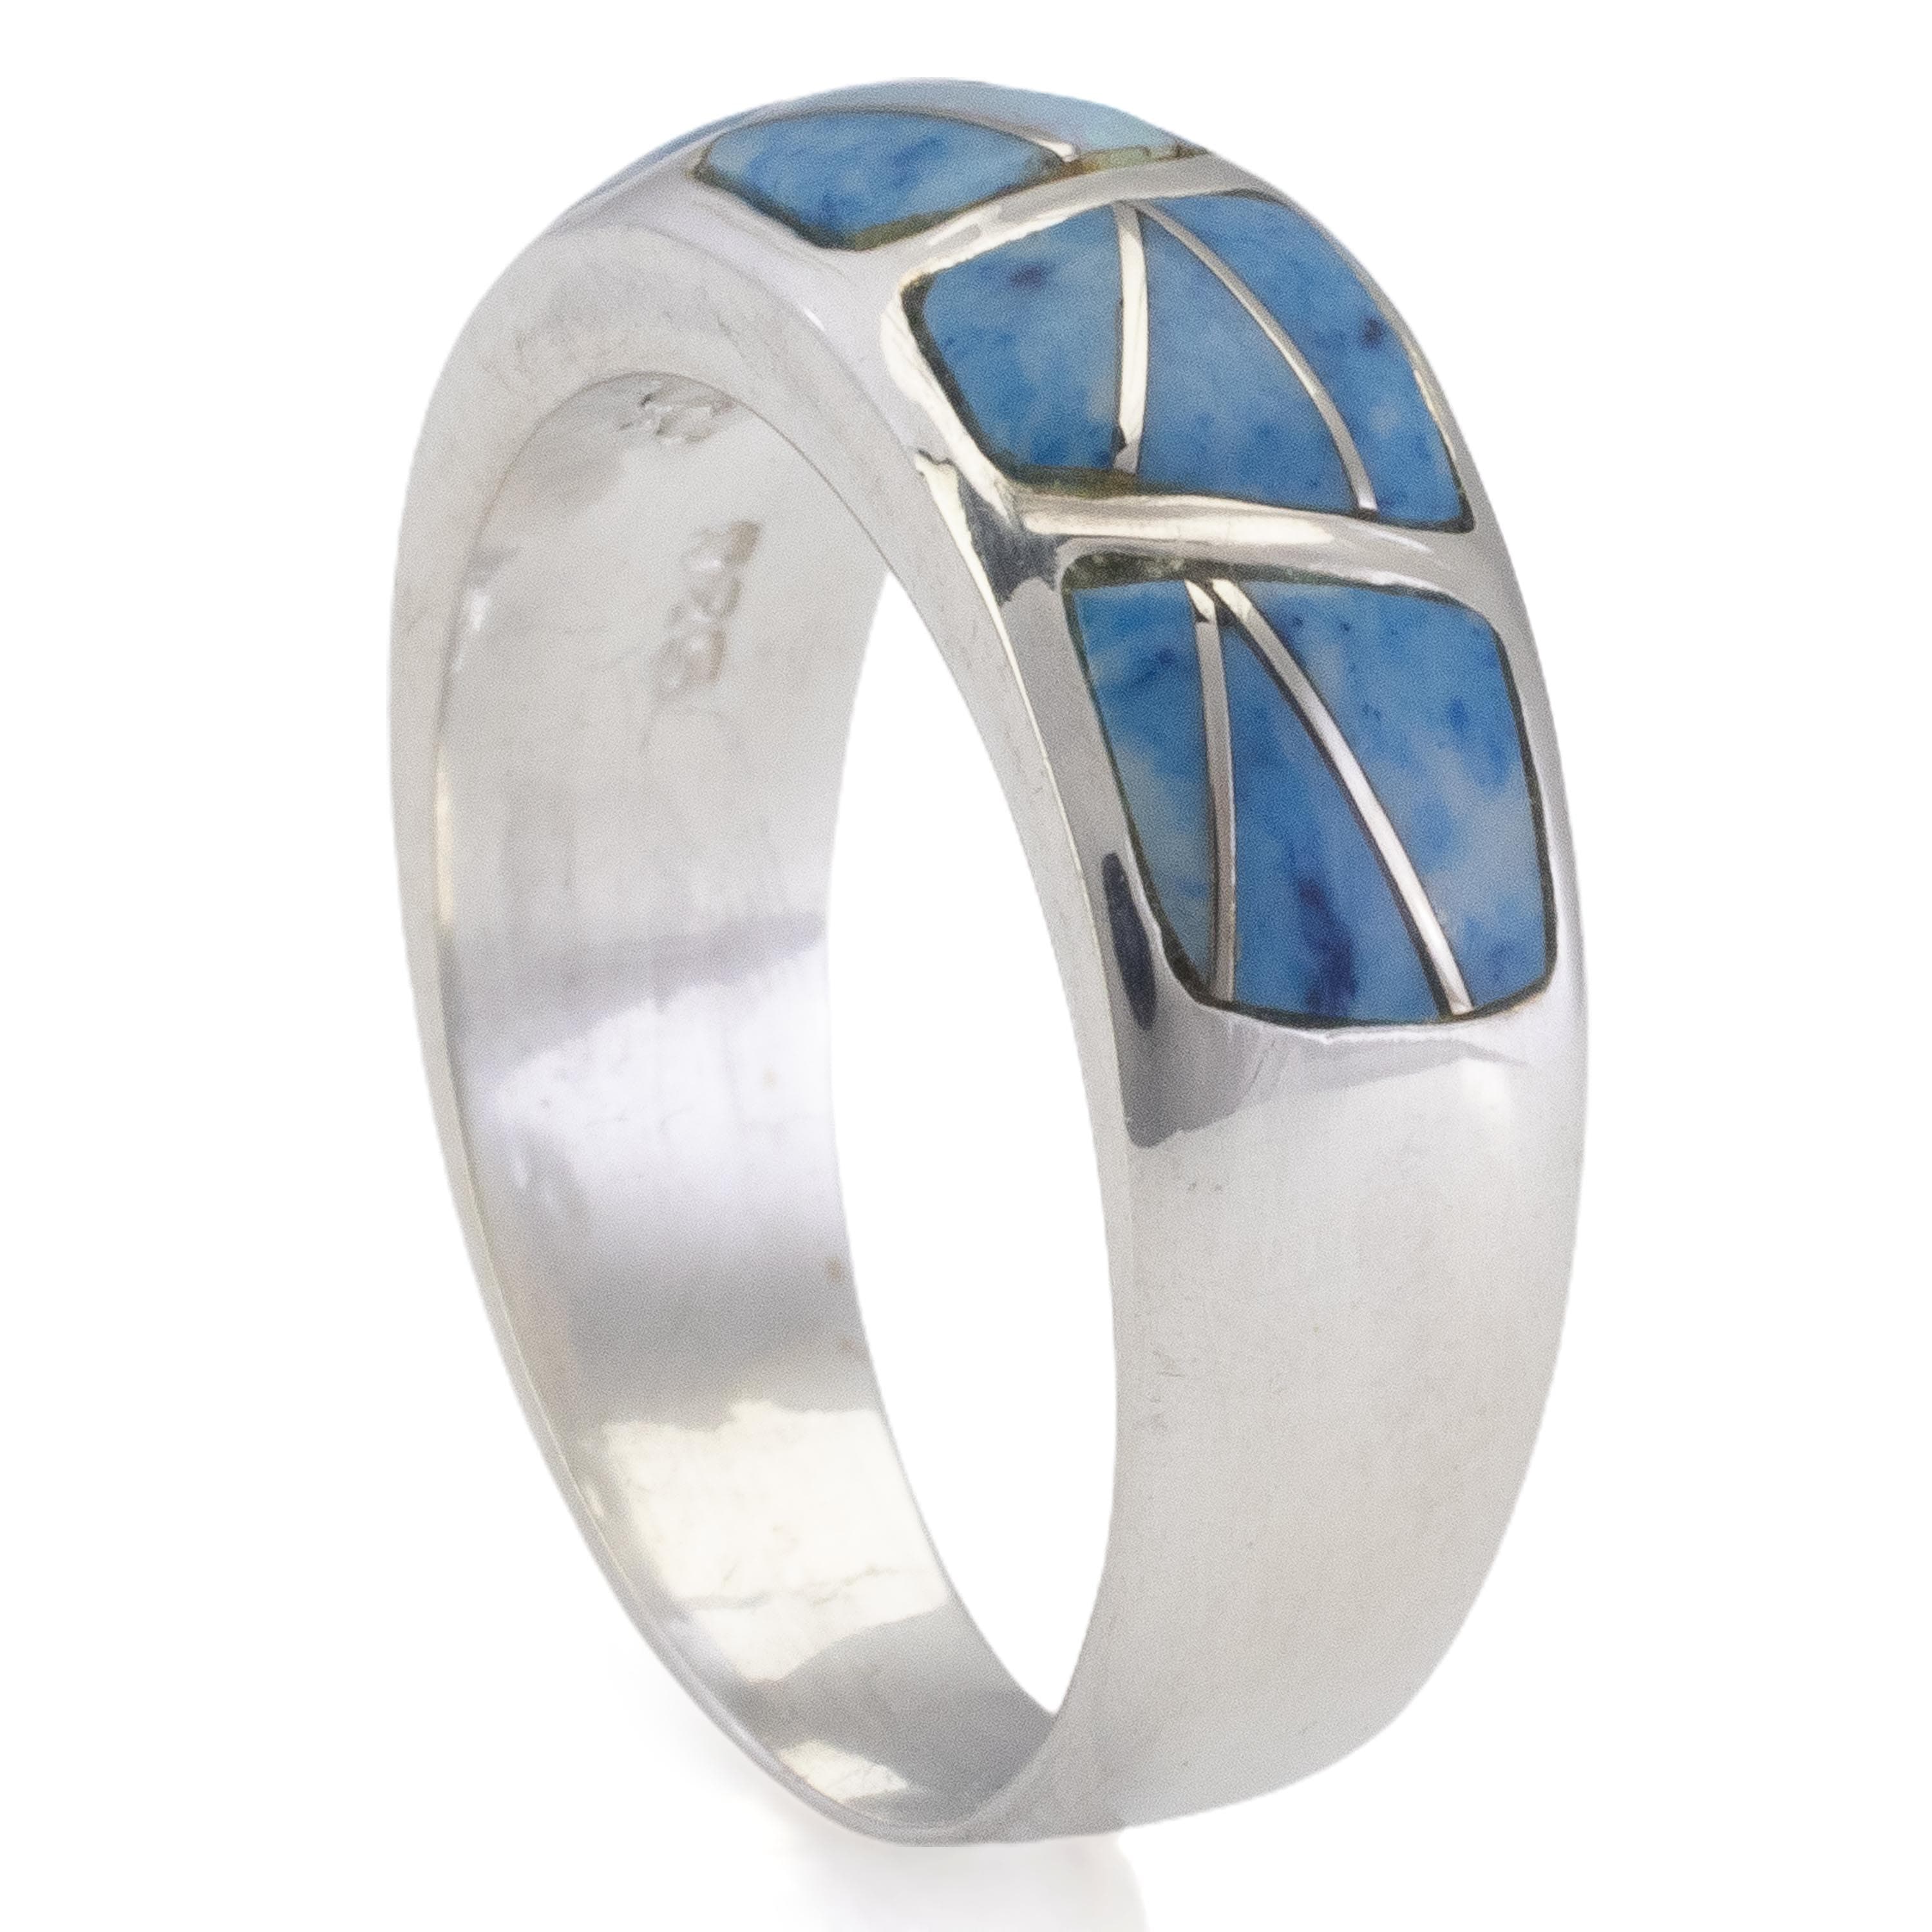 Kalifano Southwest Silver Jewelry Denim Lapis 925 Sterling Silver Ring Handmade with Laboratory Opal Accent